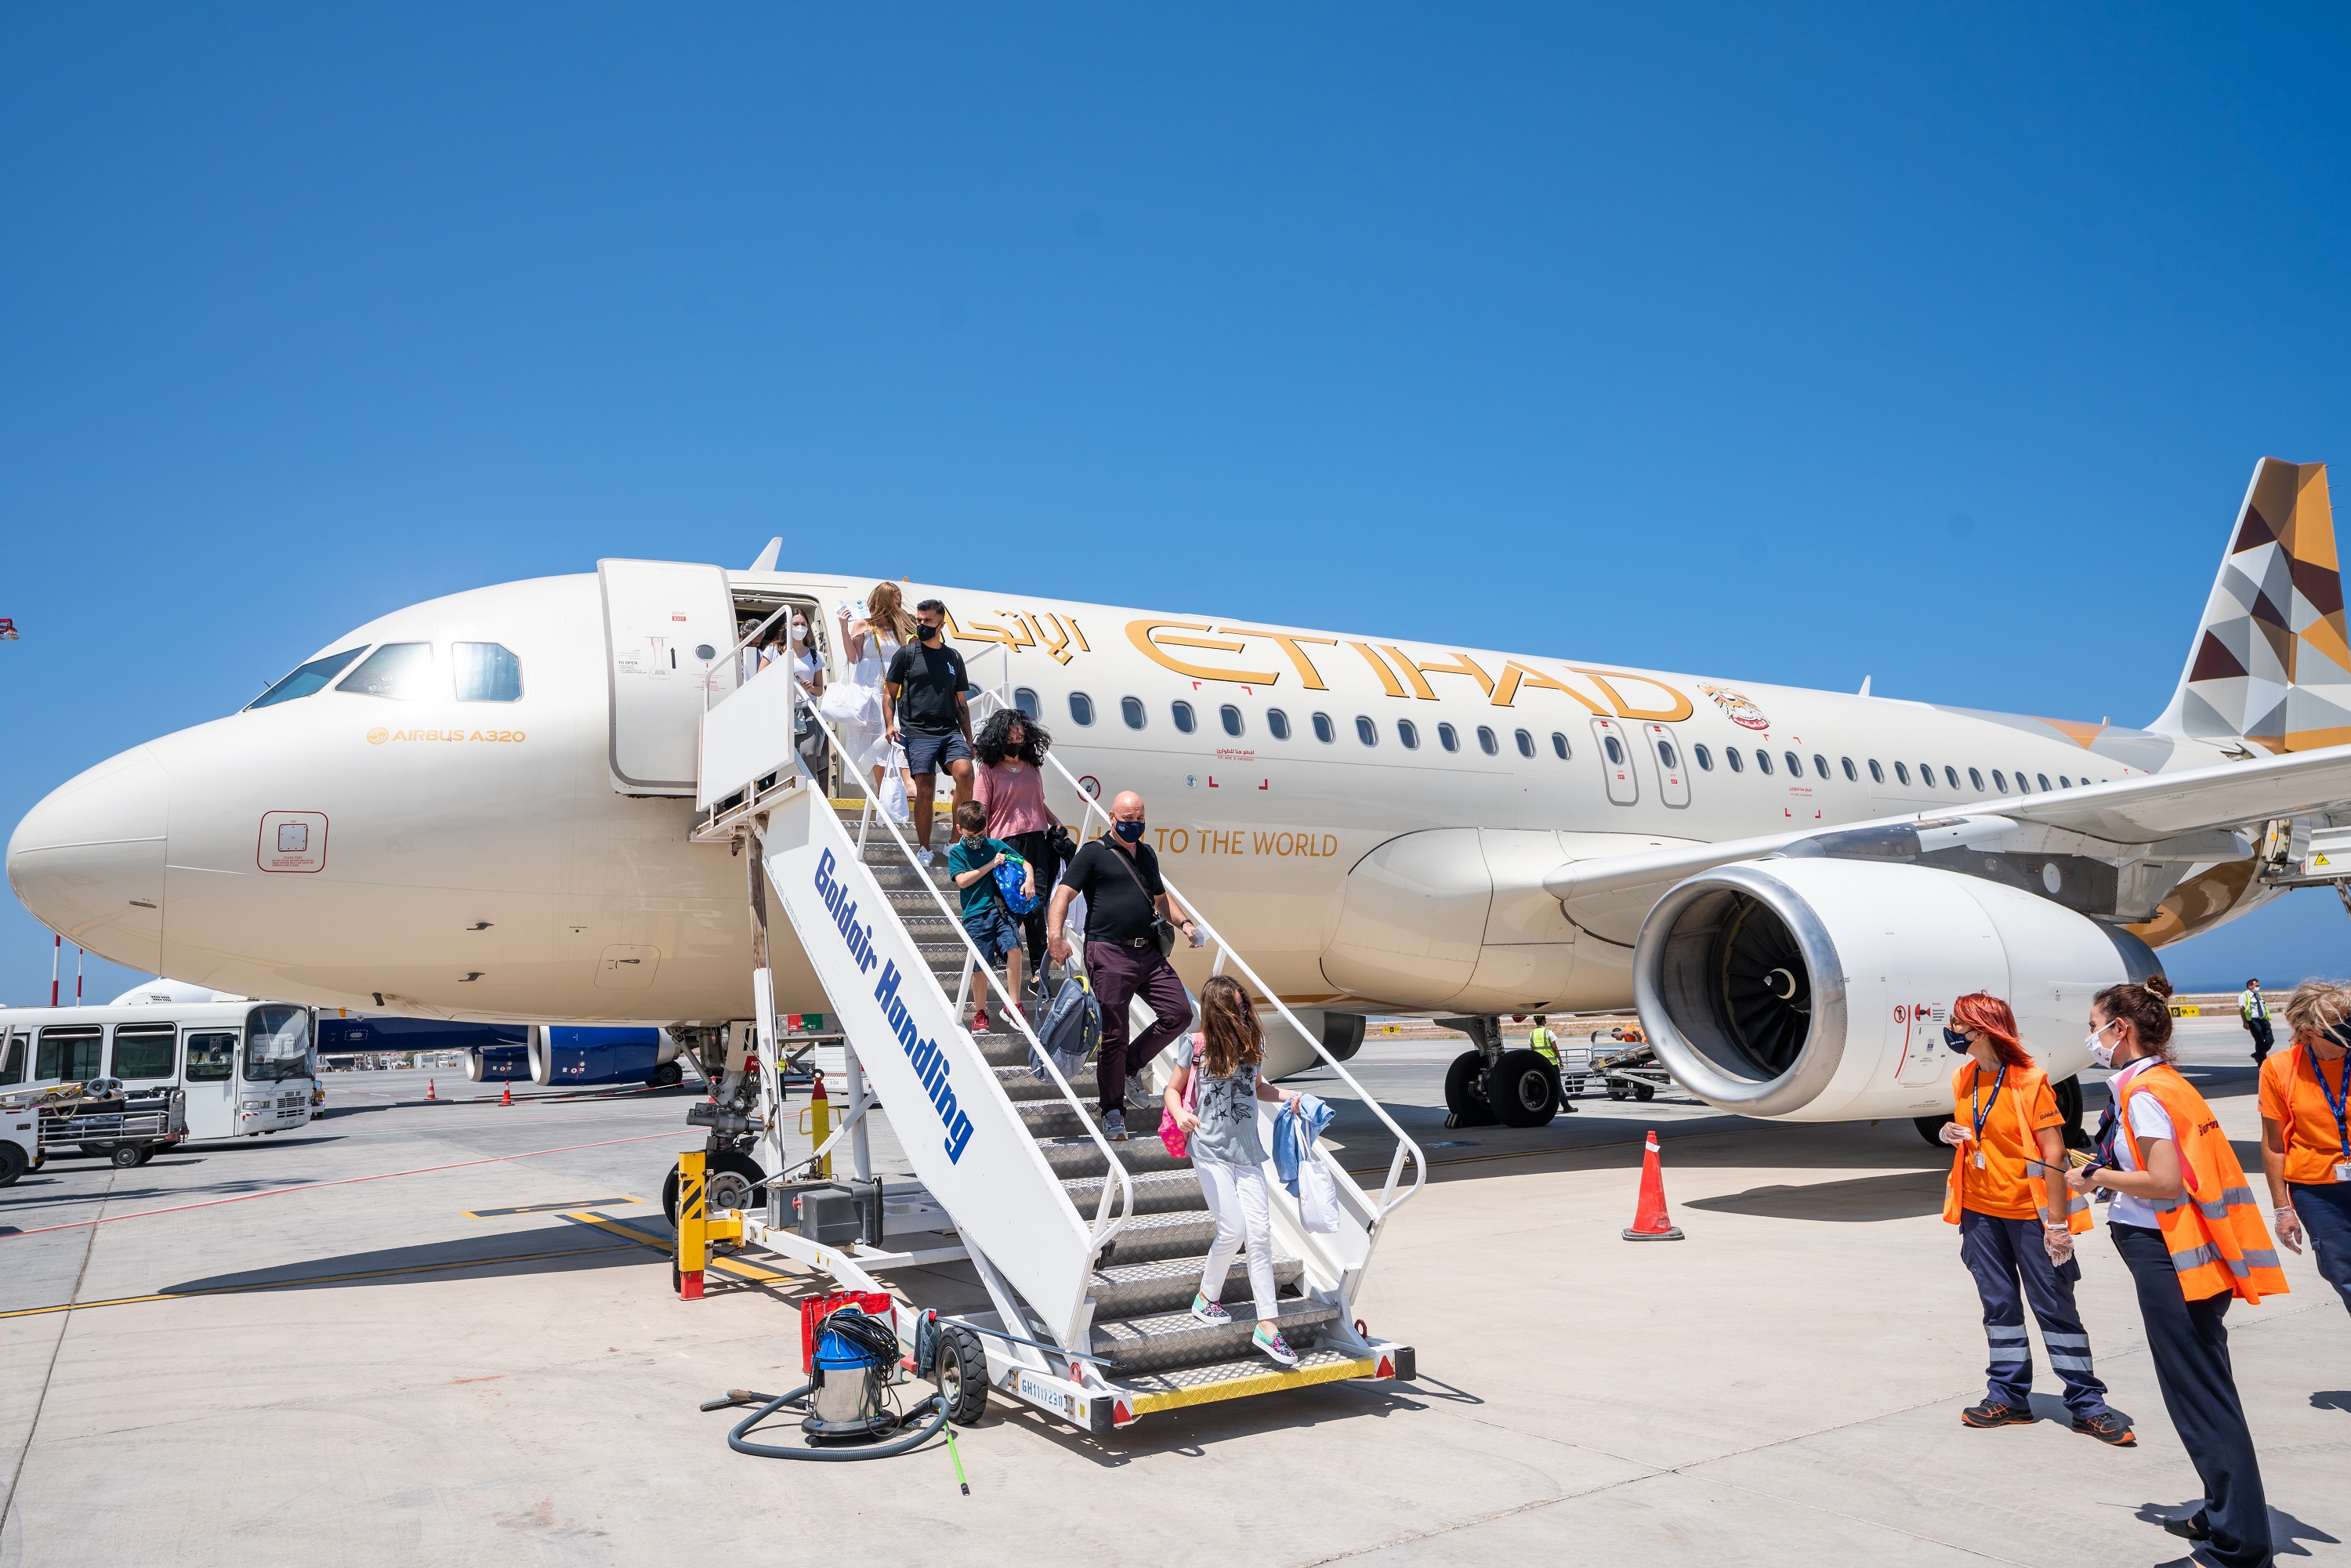 Etihad Launches Flights To Mykonos, Santorini And Malaga: Three Route Launches In Just Over 24 Hours